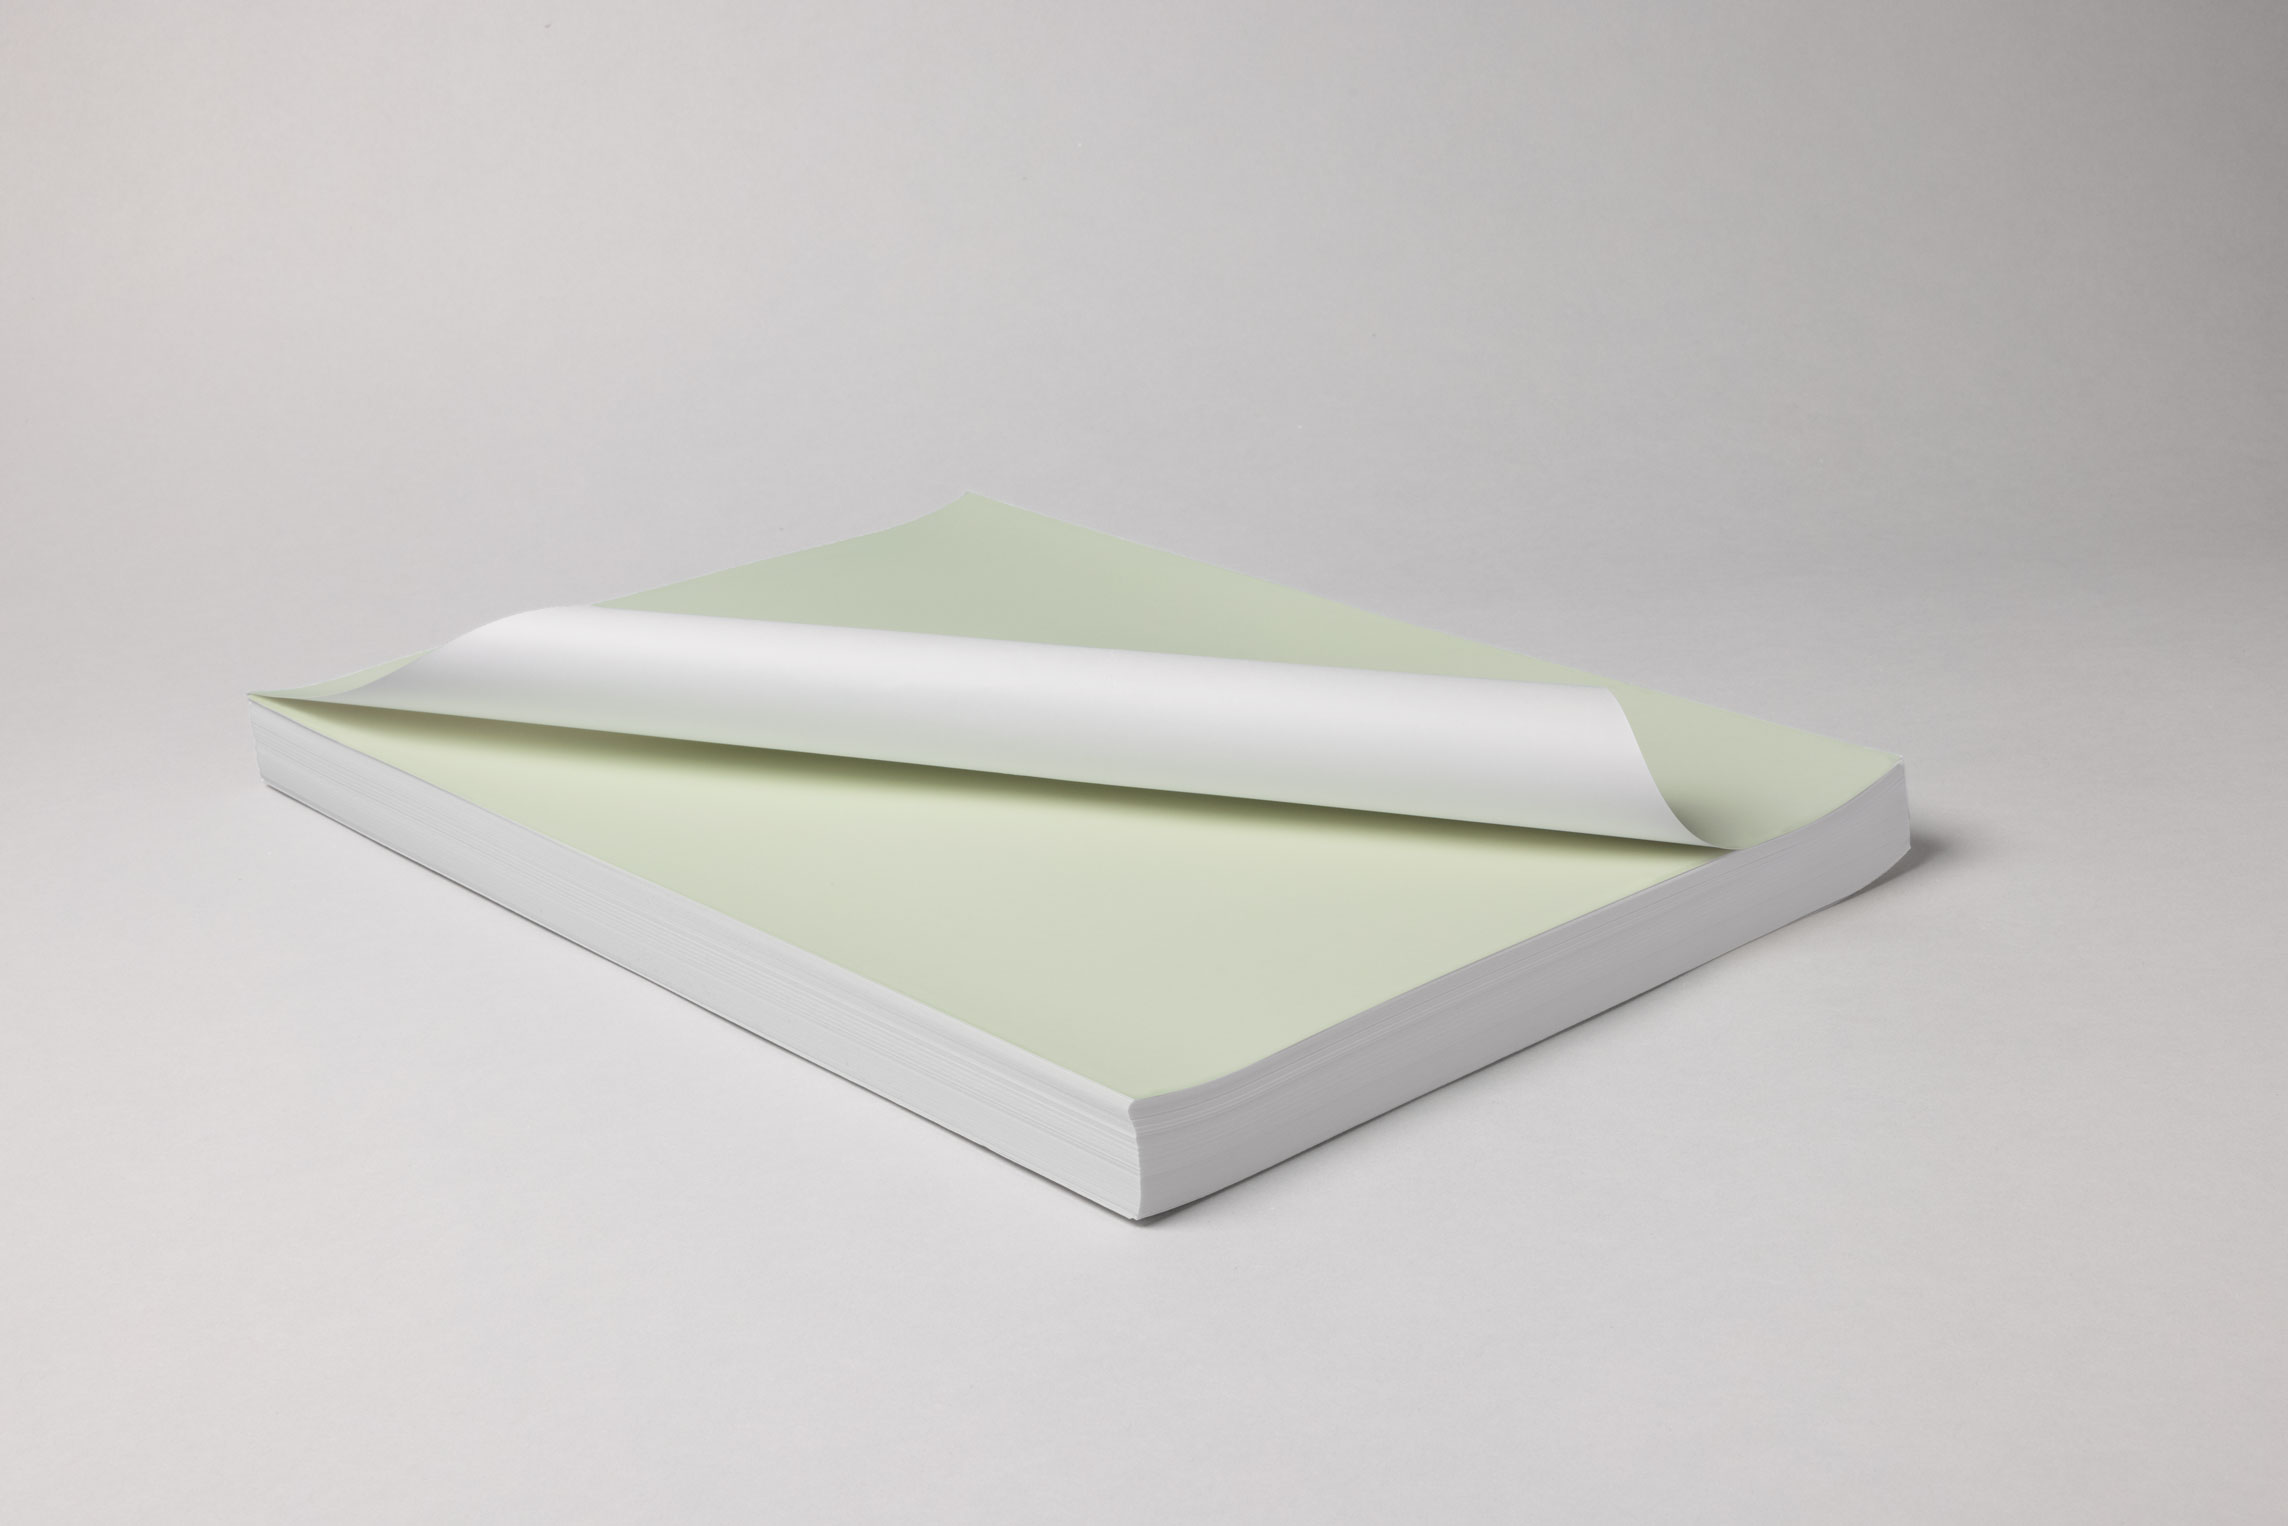 Ceramictoner laminate paper with selenium flow is suitable for application on flat surfaces. The coating is applied to the decal with the help of a laminator.